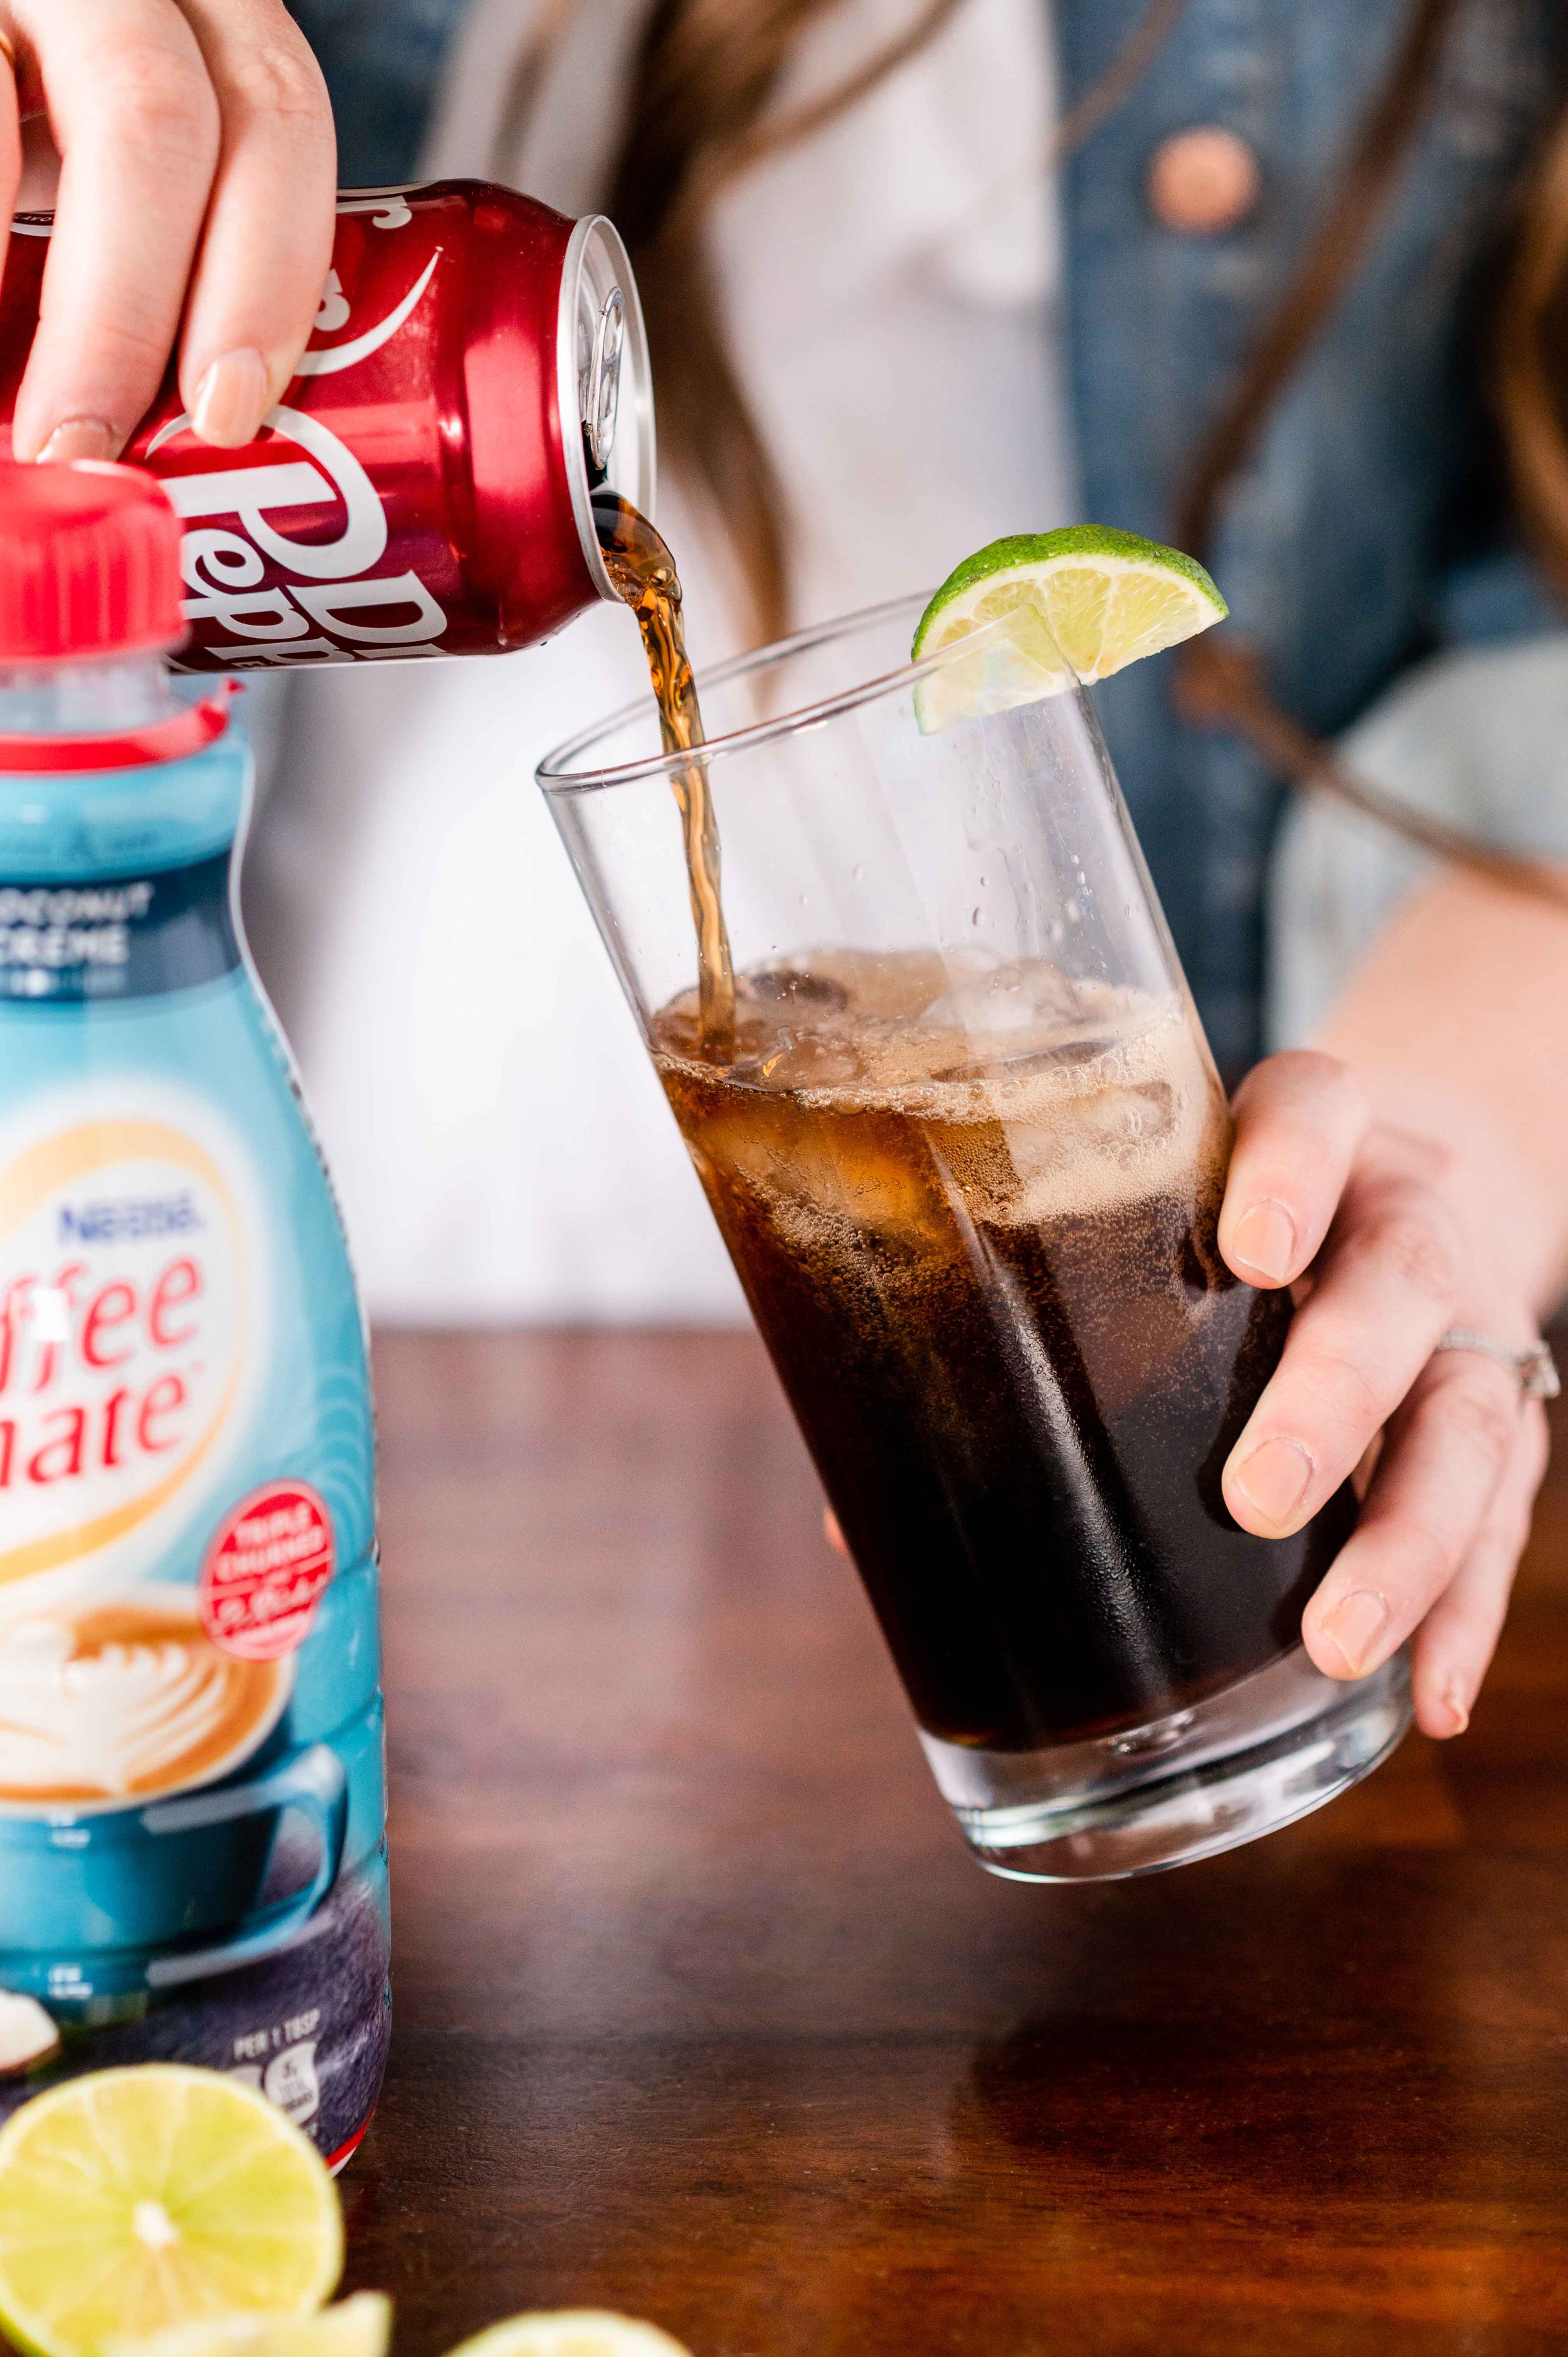 Dr Pepper Creamy Coconut: Here's What We Know So Far